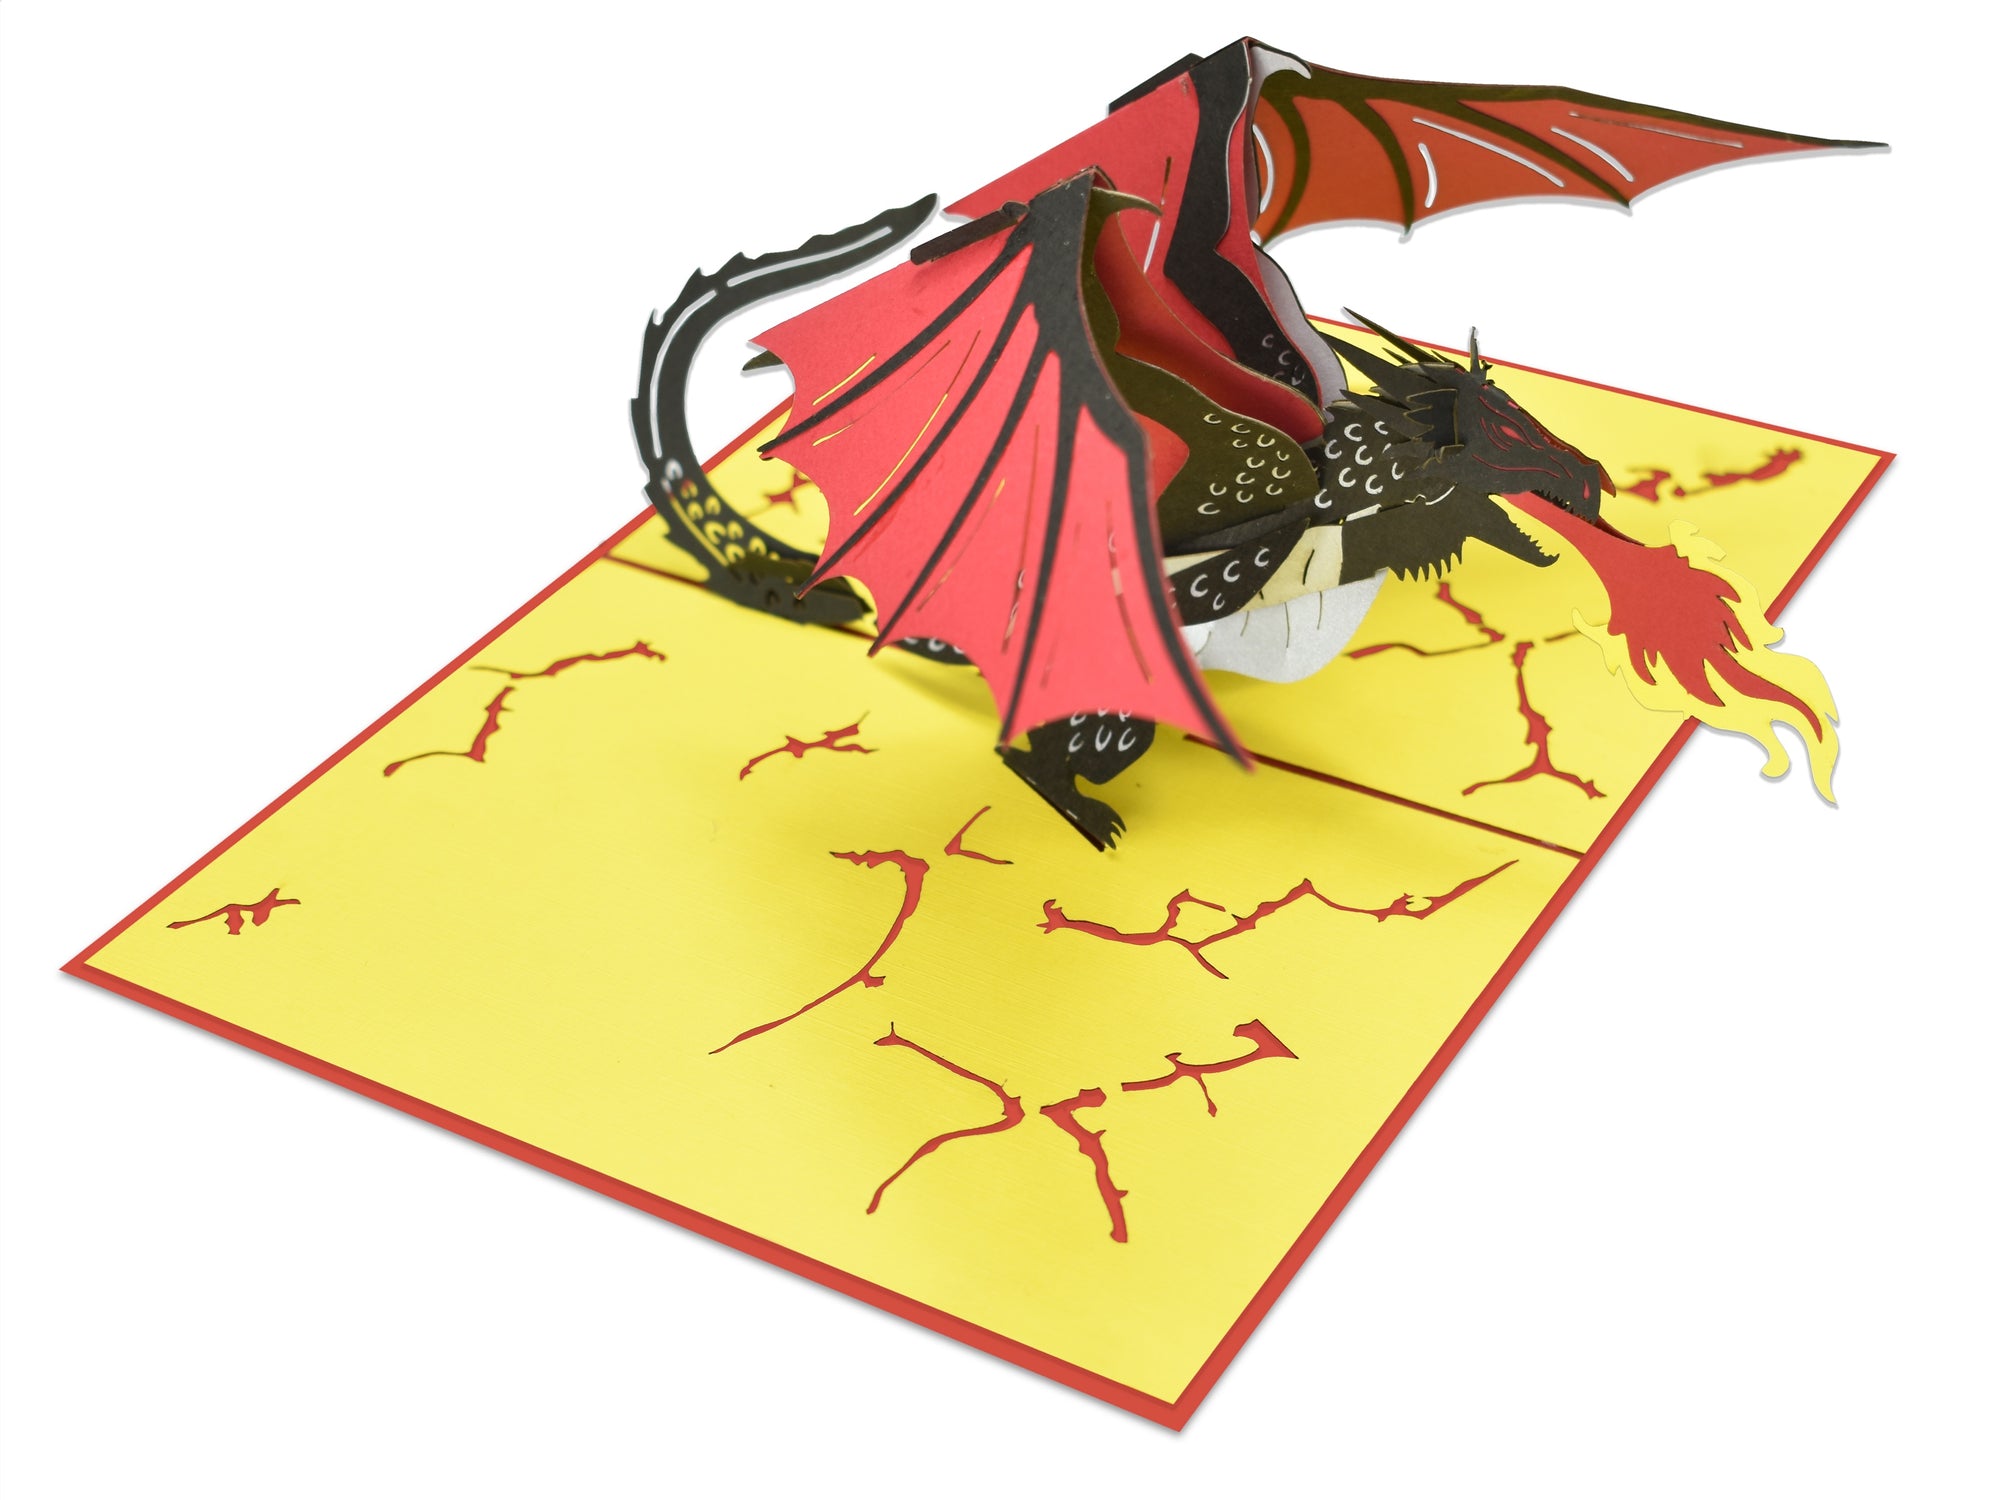 Red Dragon 3D Creative Pop Up Card